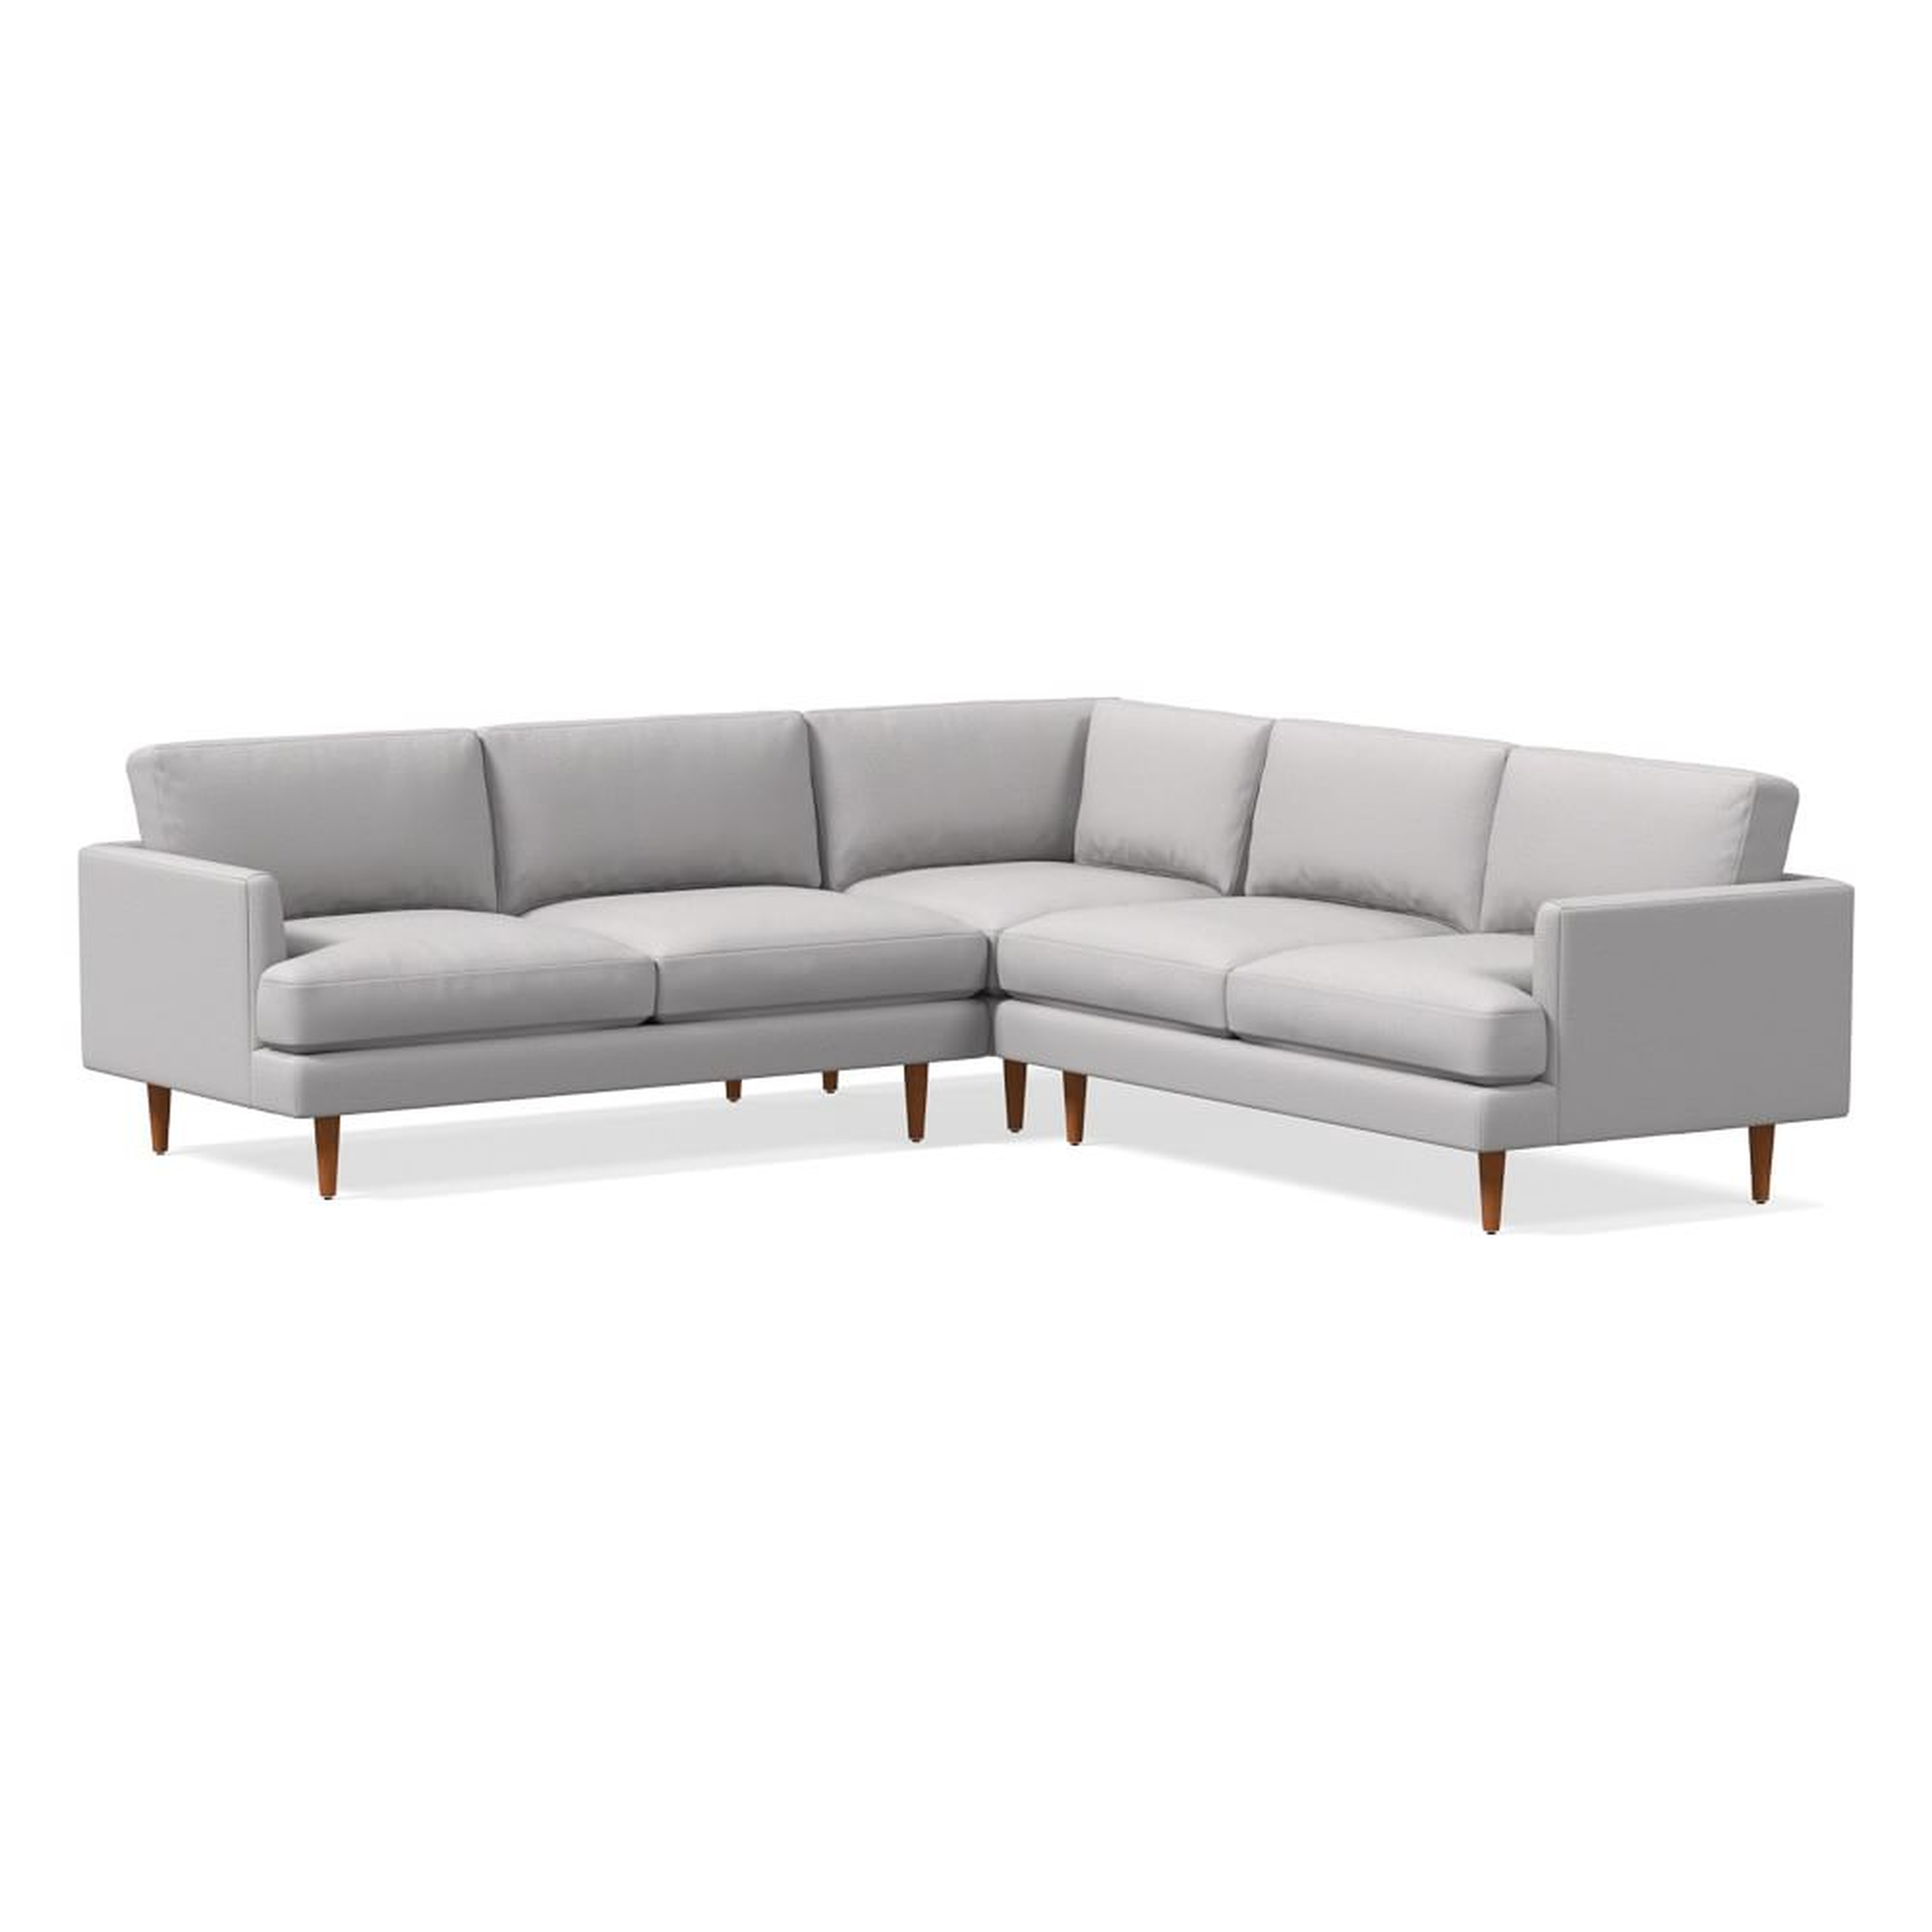 Haven Loft 104" 3-Piece L-Shaped Sectional, Chenille Tweed, Frost Gray, Pecan - West Elm